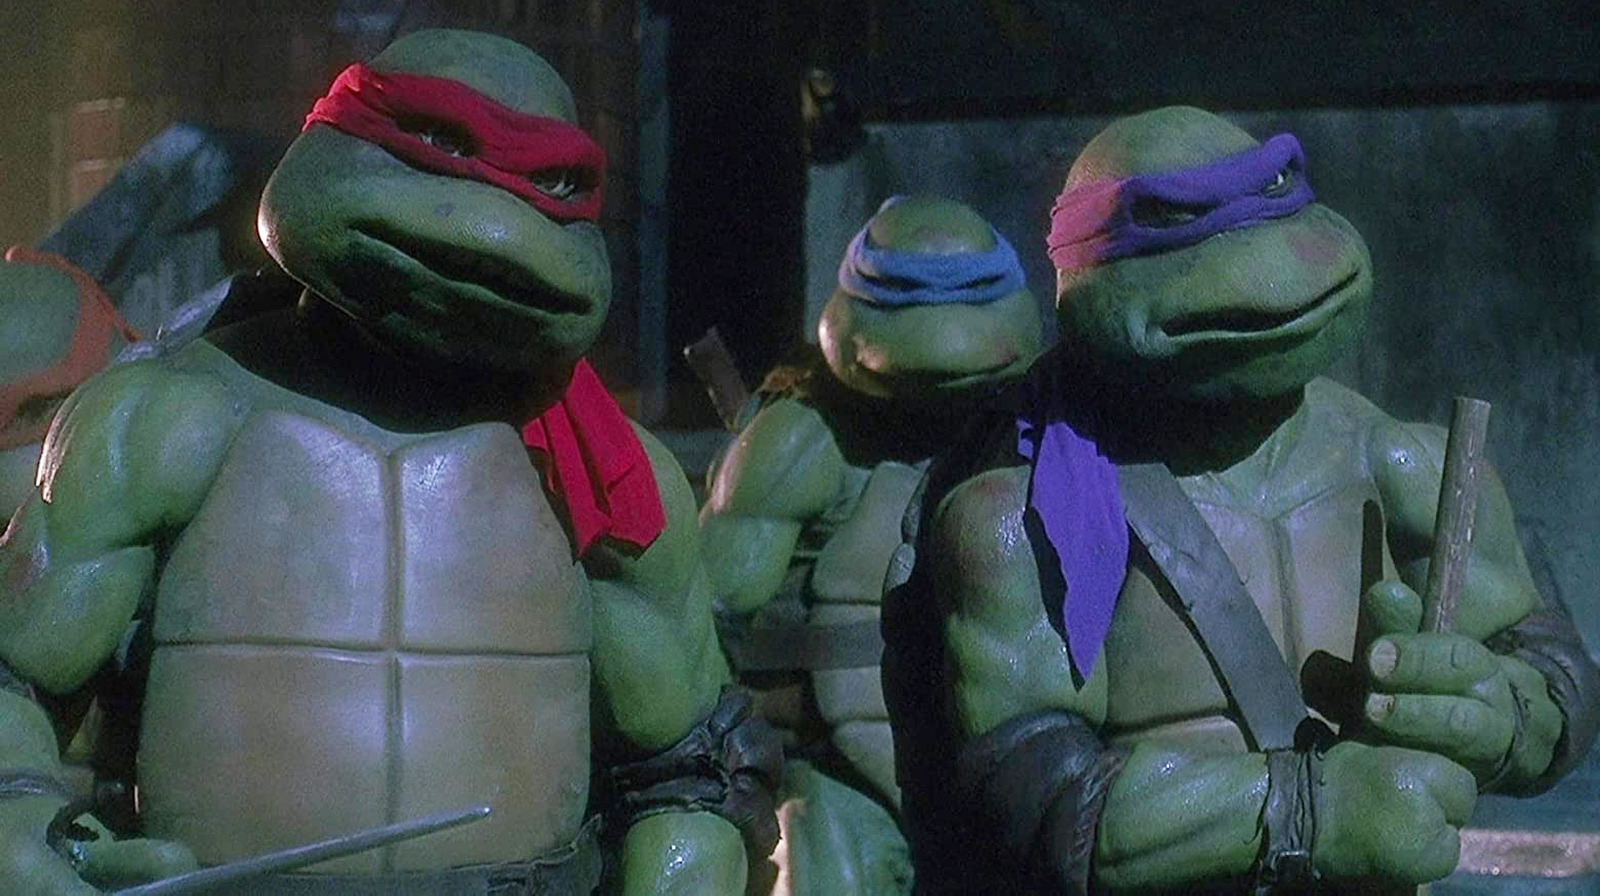 Replacing The Teenage Mutant Ninja Turtles' Voices In Post Wasn't A